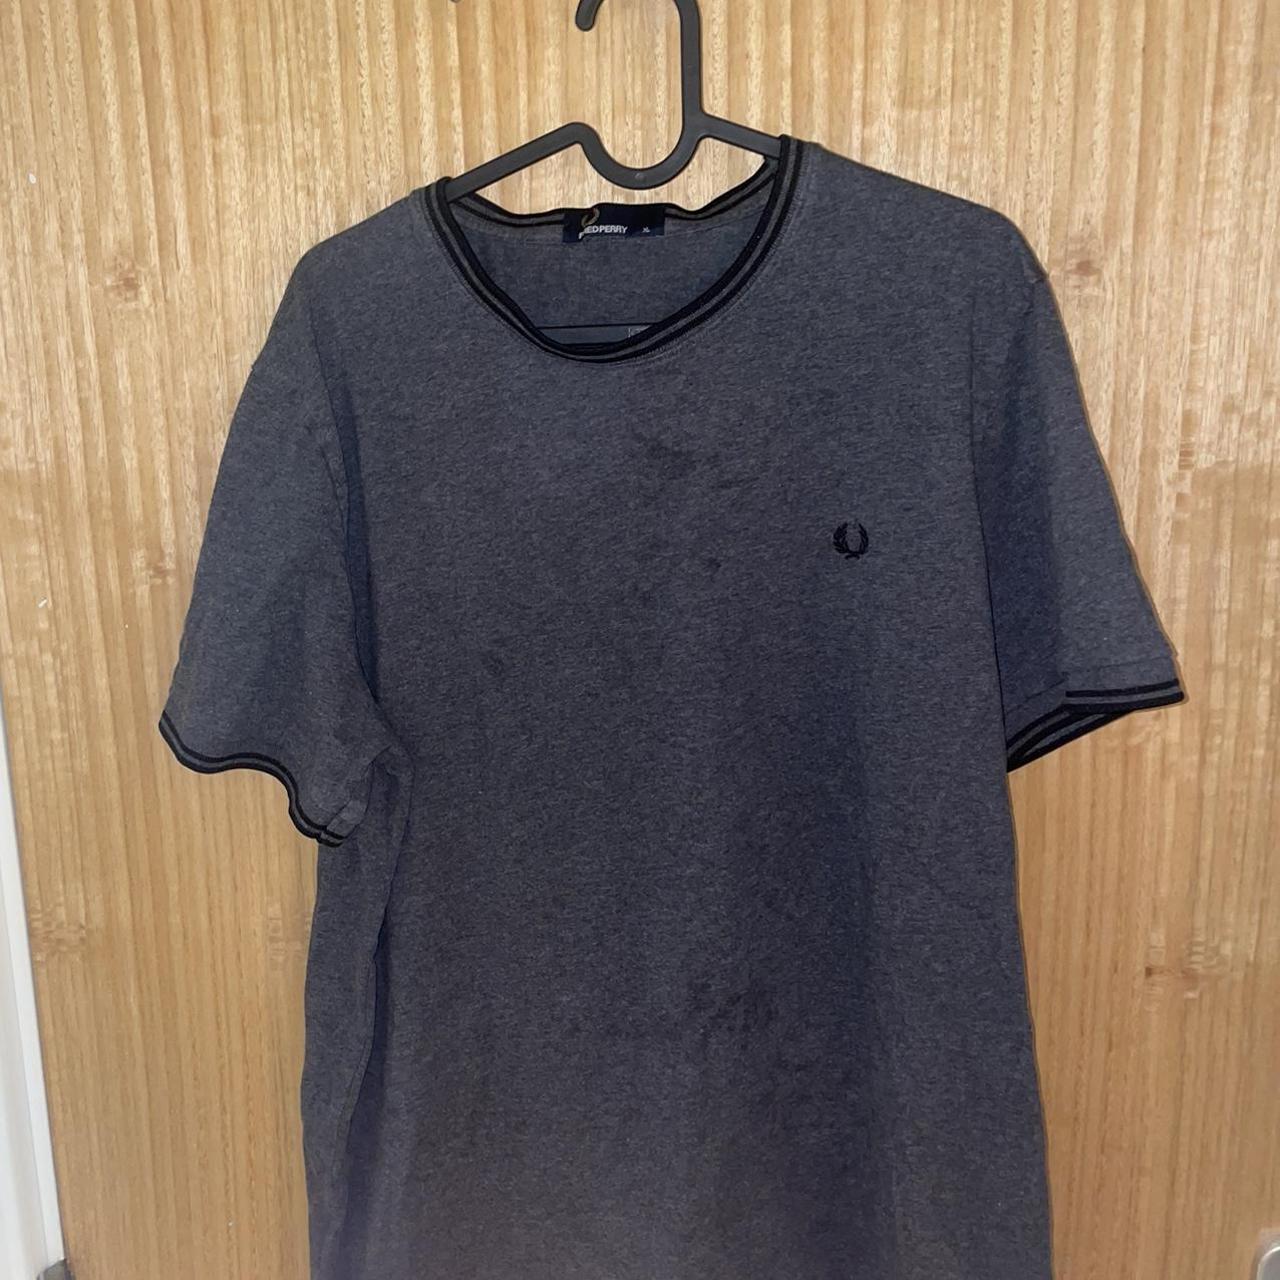 Fred Perry T-Shirt Very good condition OPEN TO... - Depop